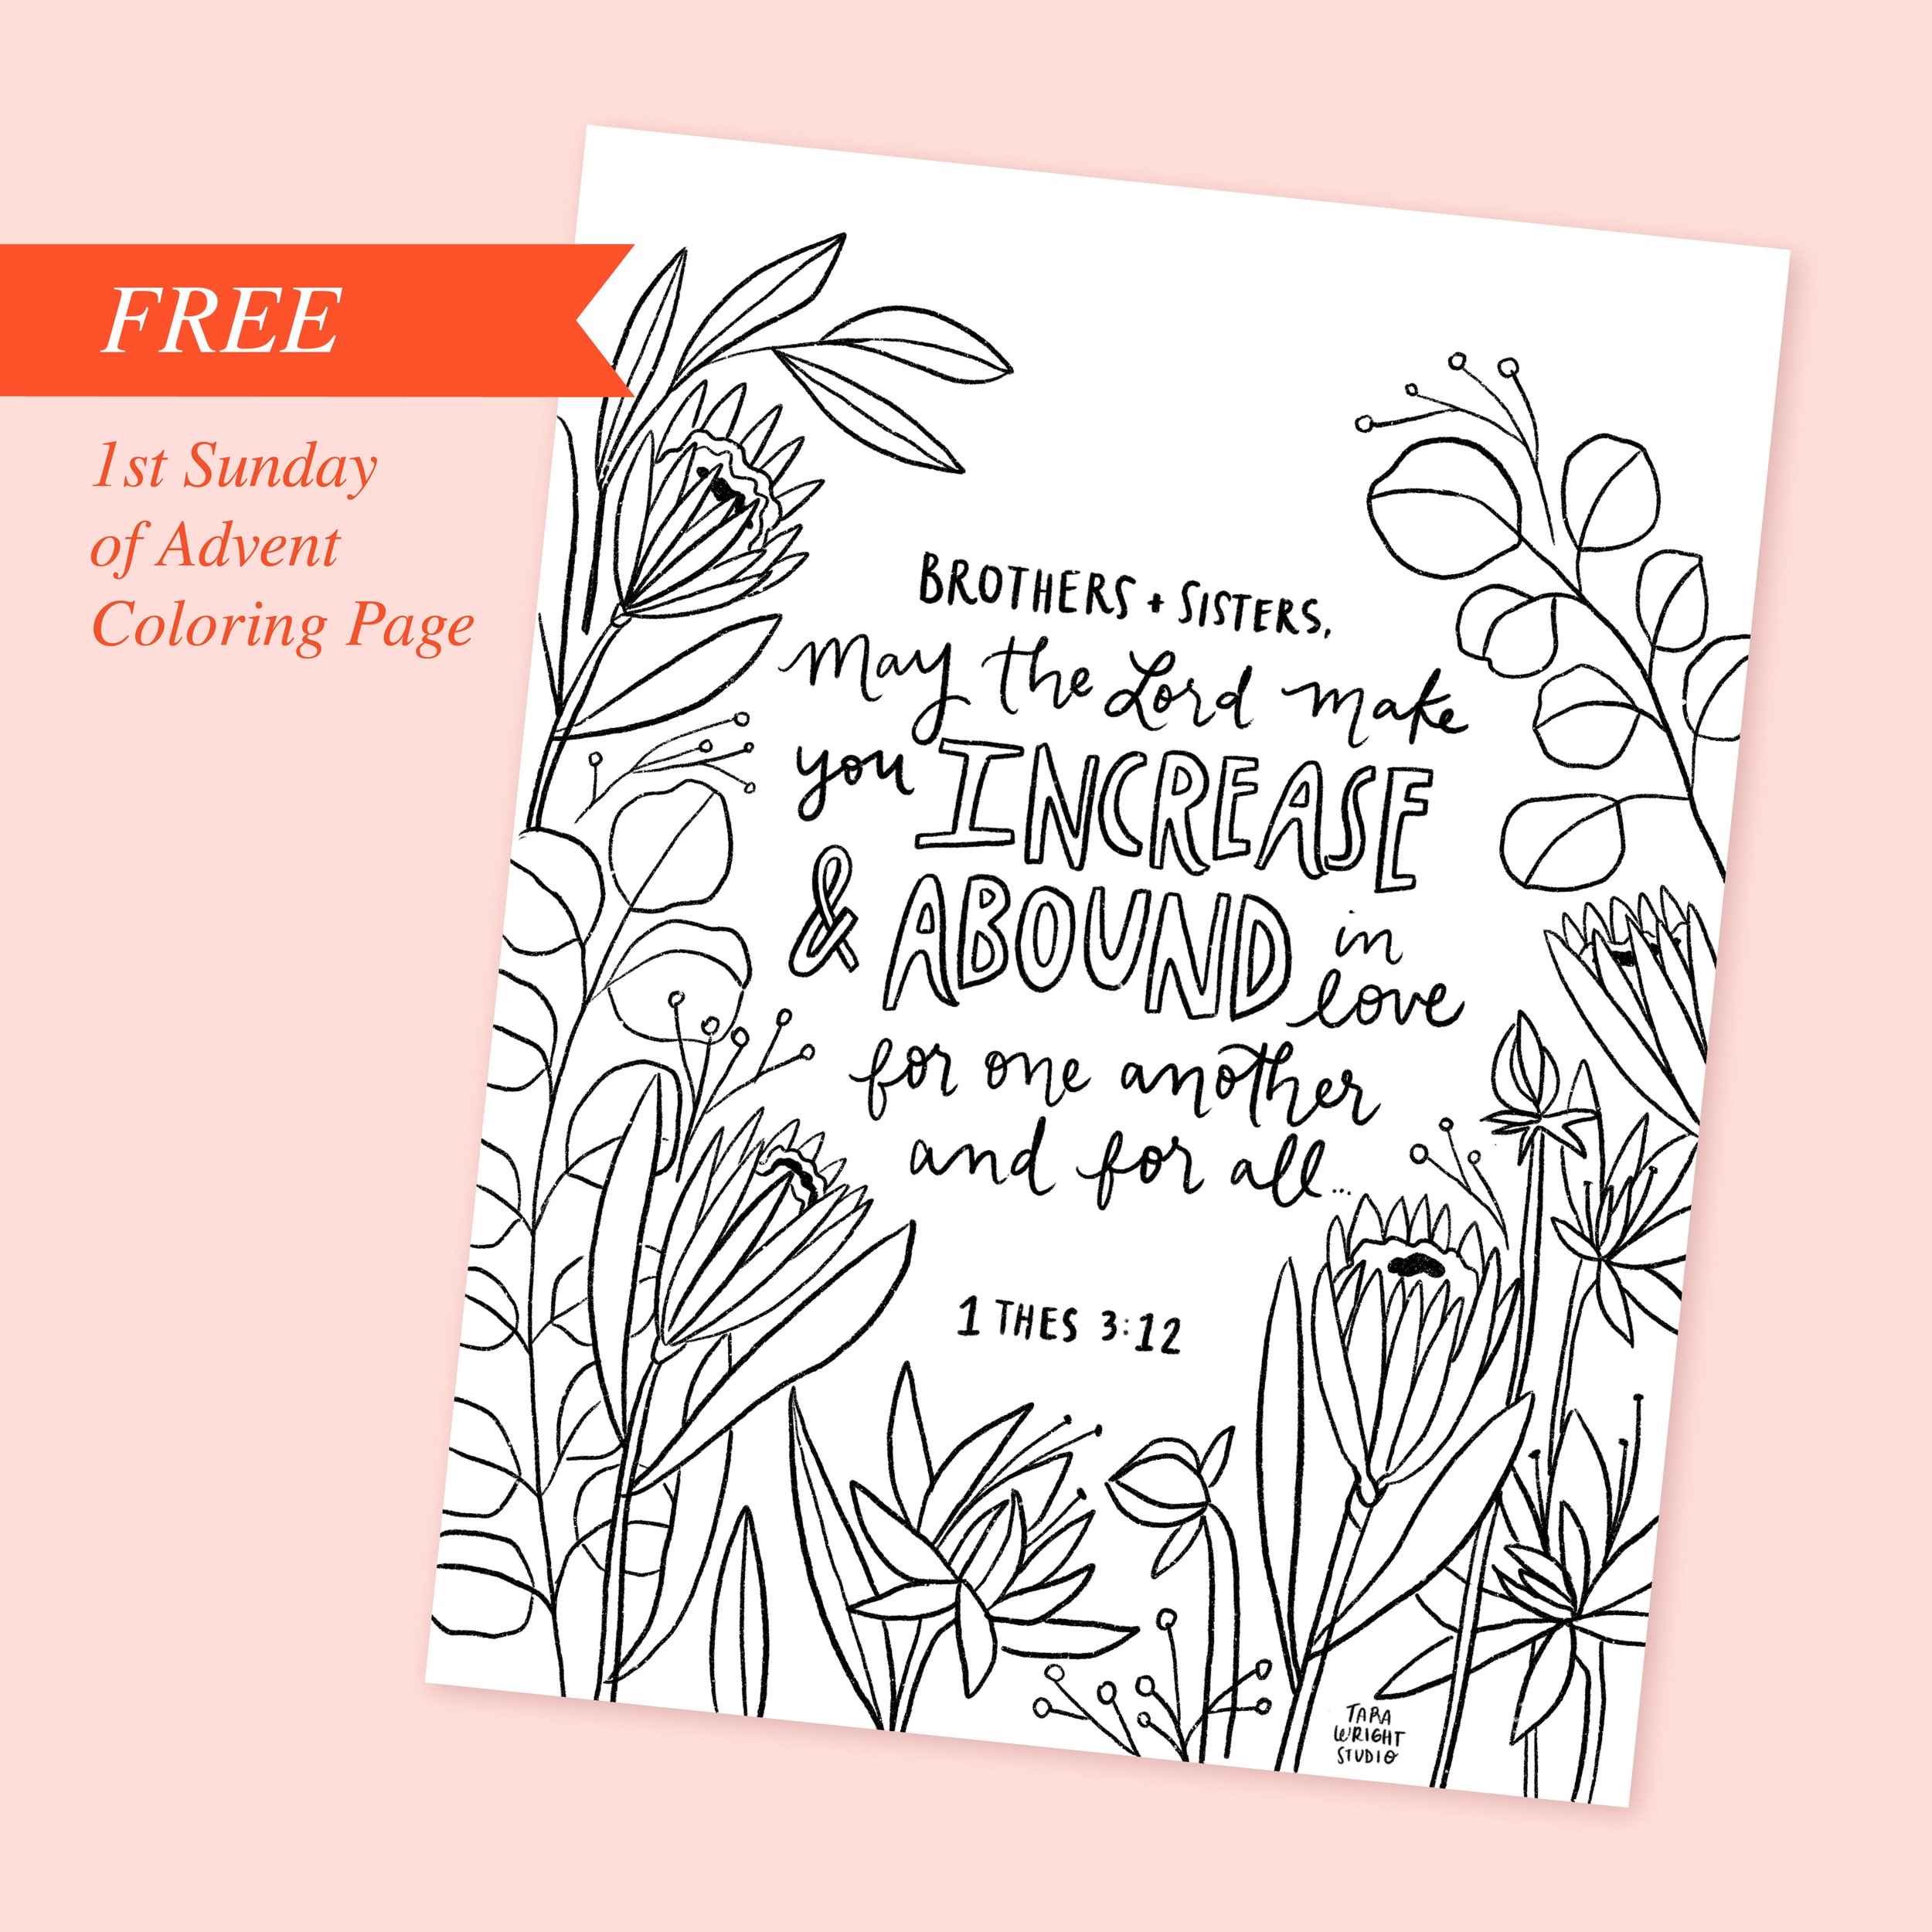 Free first sunday of advent coloring page â tara wright illustration